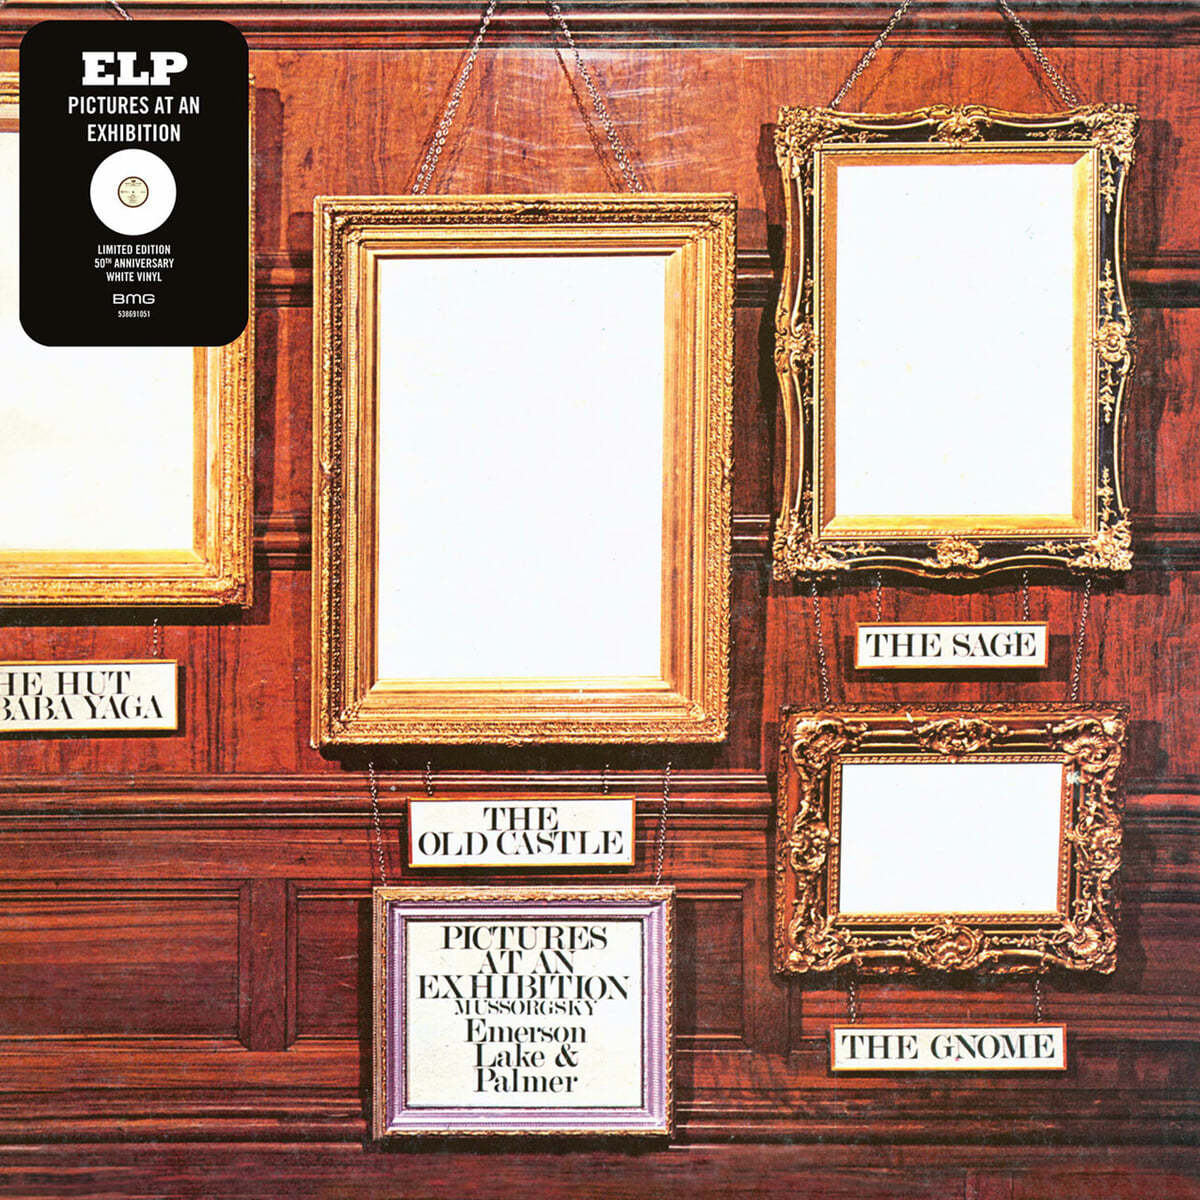 Emerson, Lake & Palmer (에머슨, 레이크 앤 팔머) - Pictures At An Exhibition [화이트 컬러 LP] 